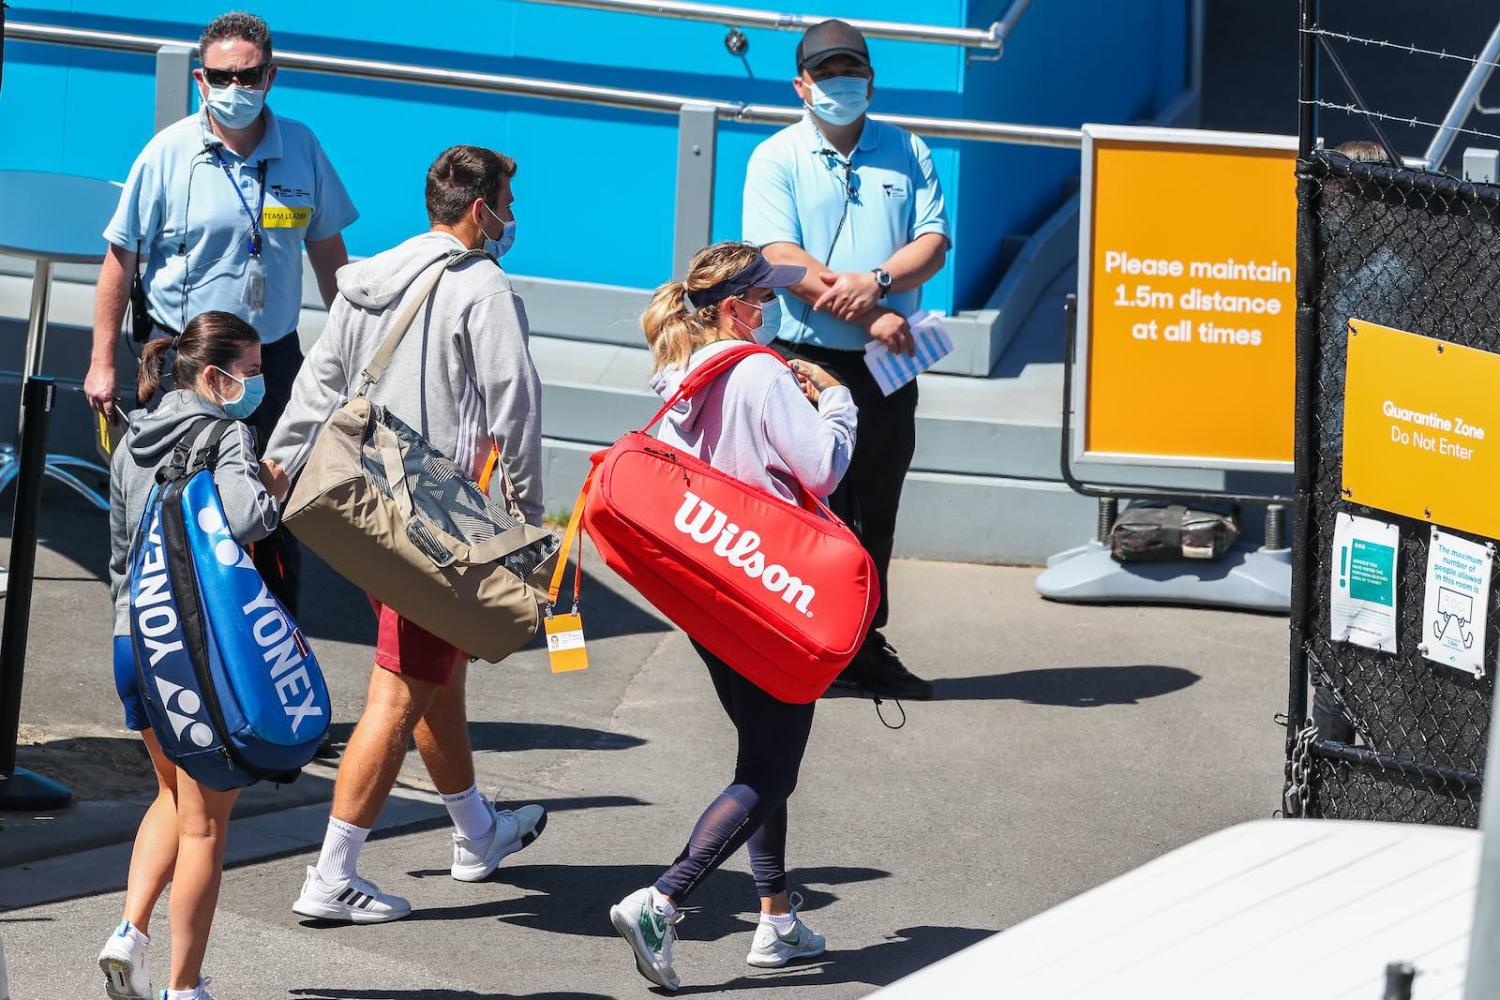 Tennis players enter the quarantine zone to train at Melbourne Park (Asanka Ratnayake/Getty Images)